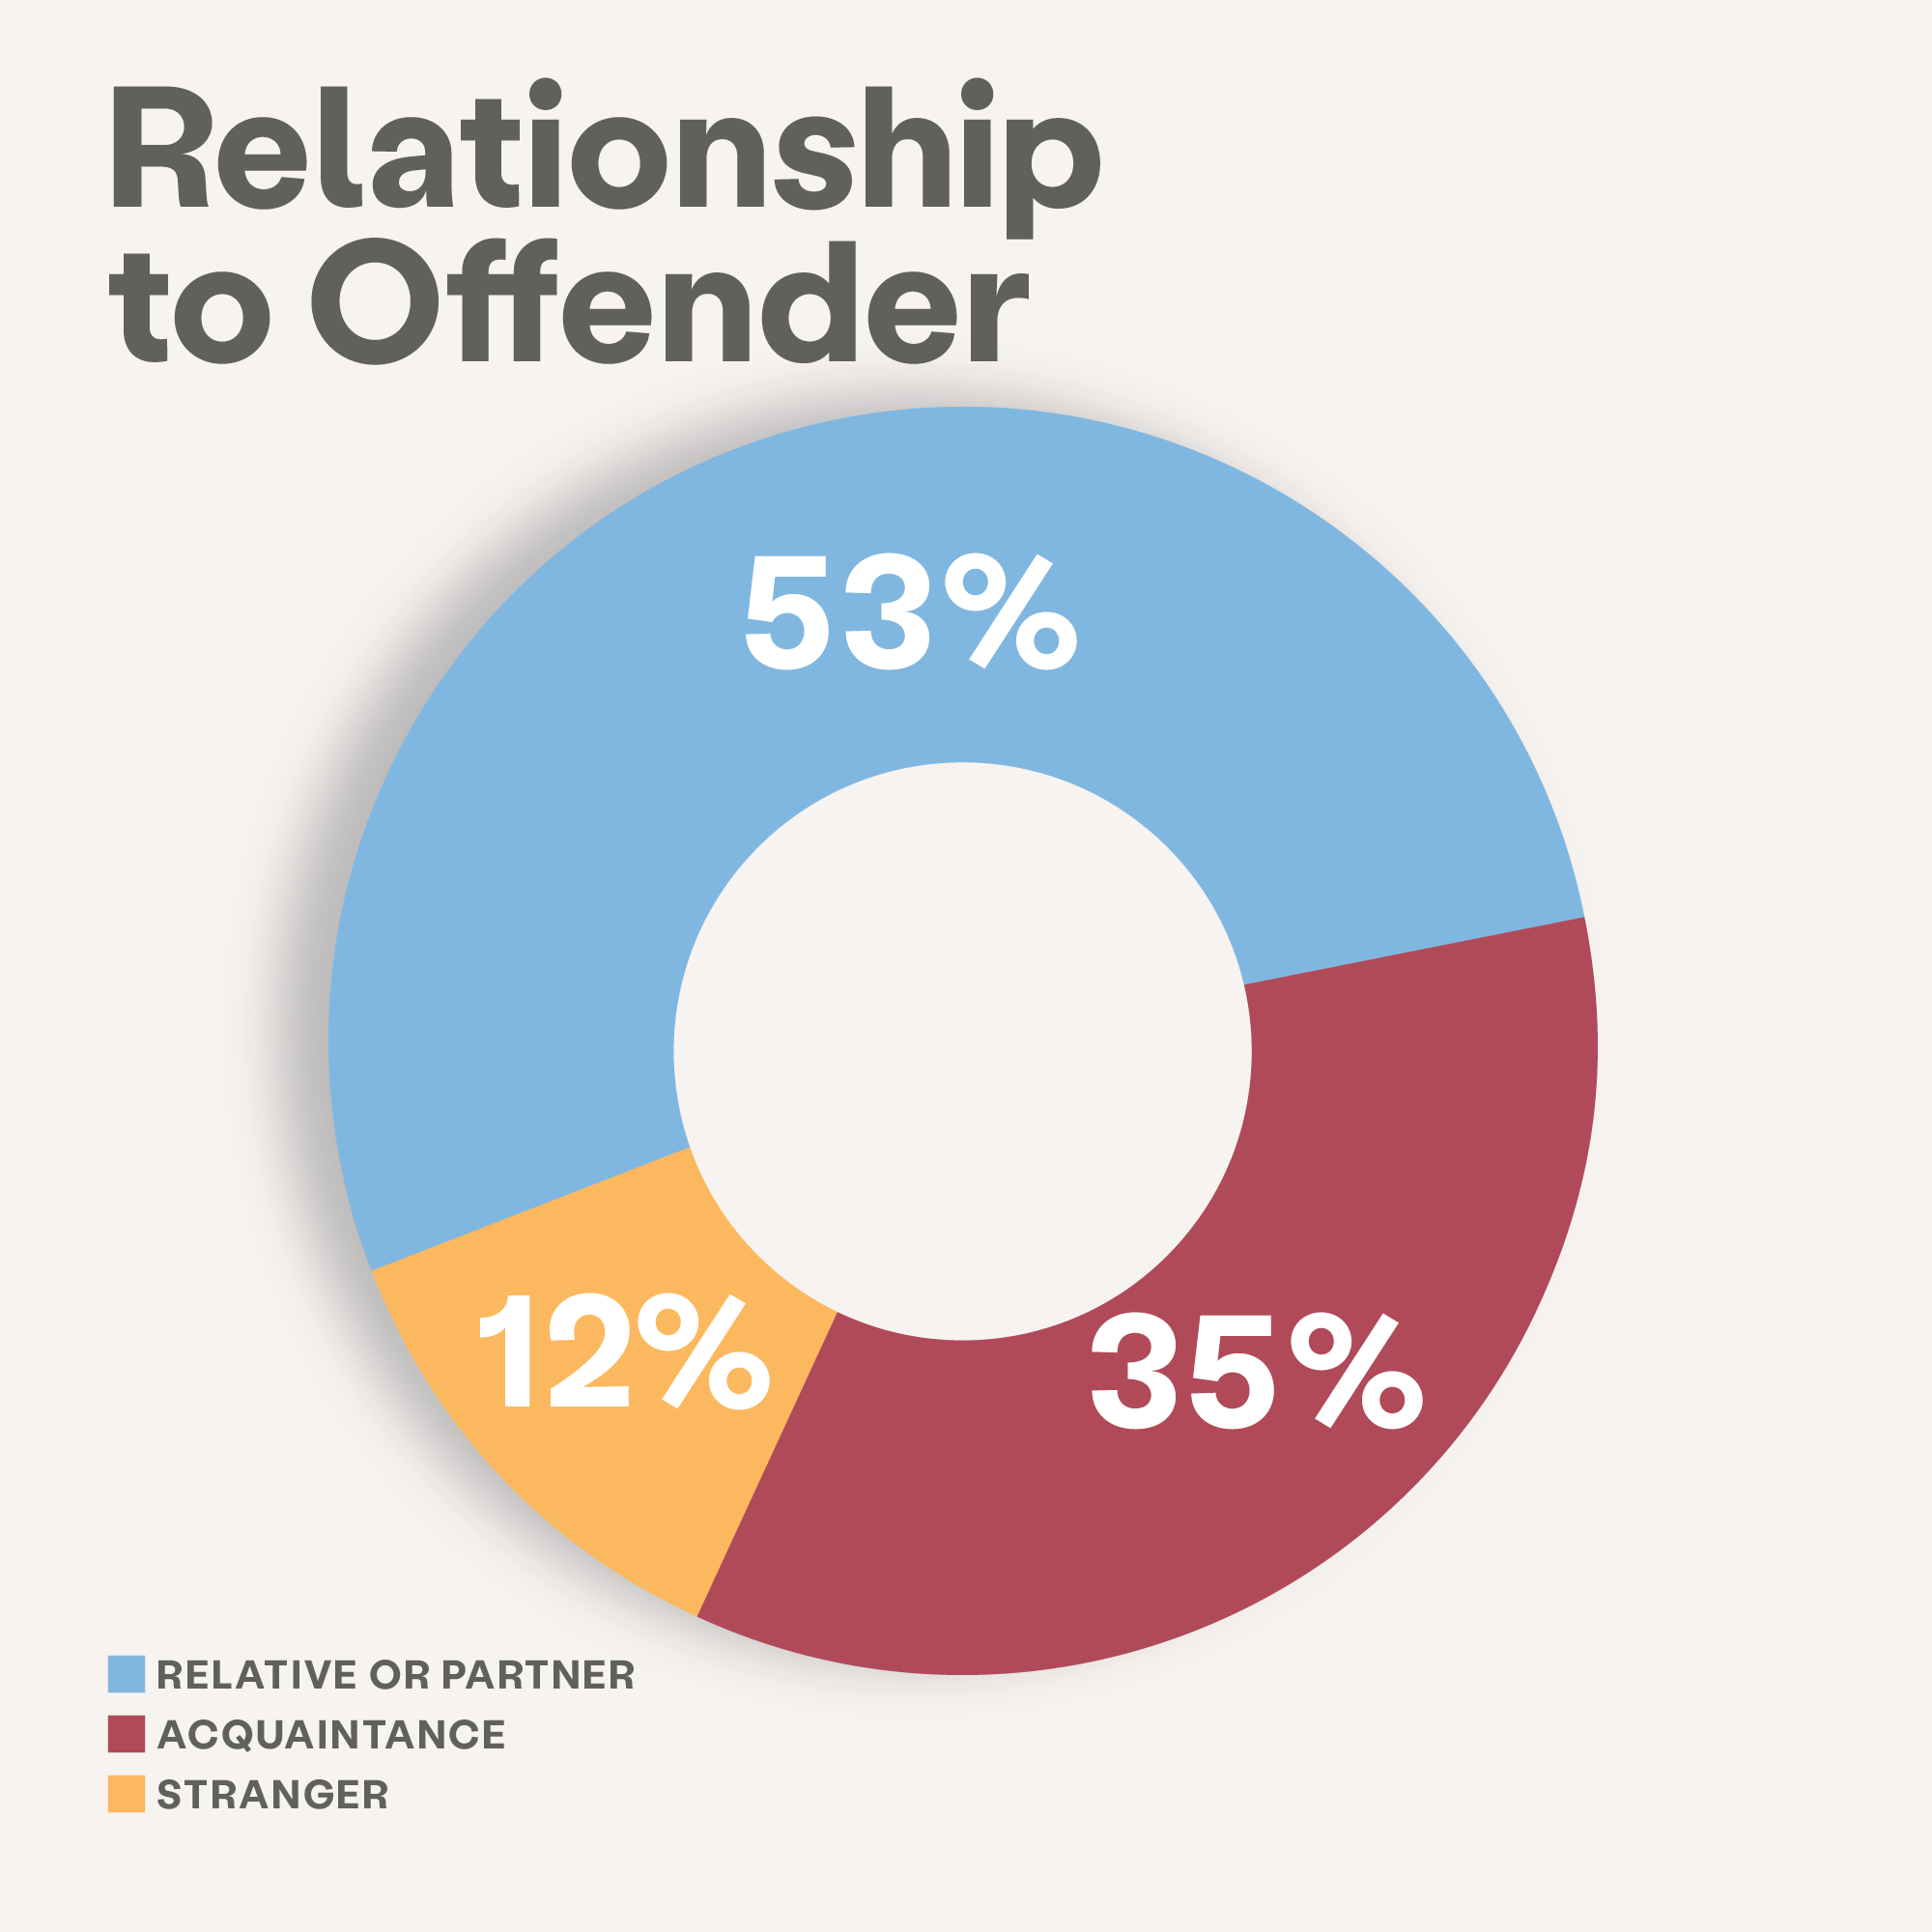 relationship to offender impact image